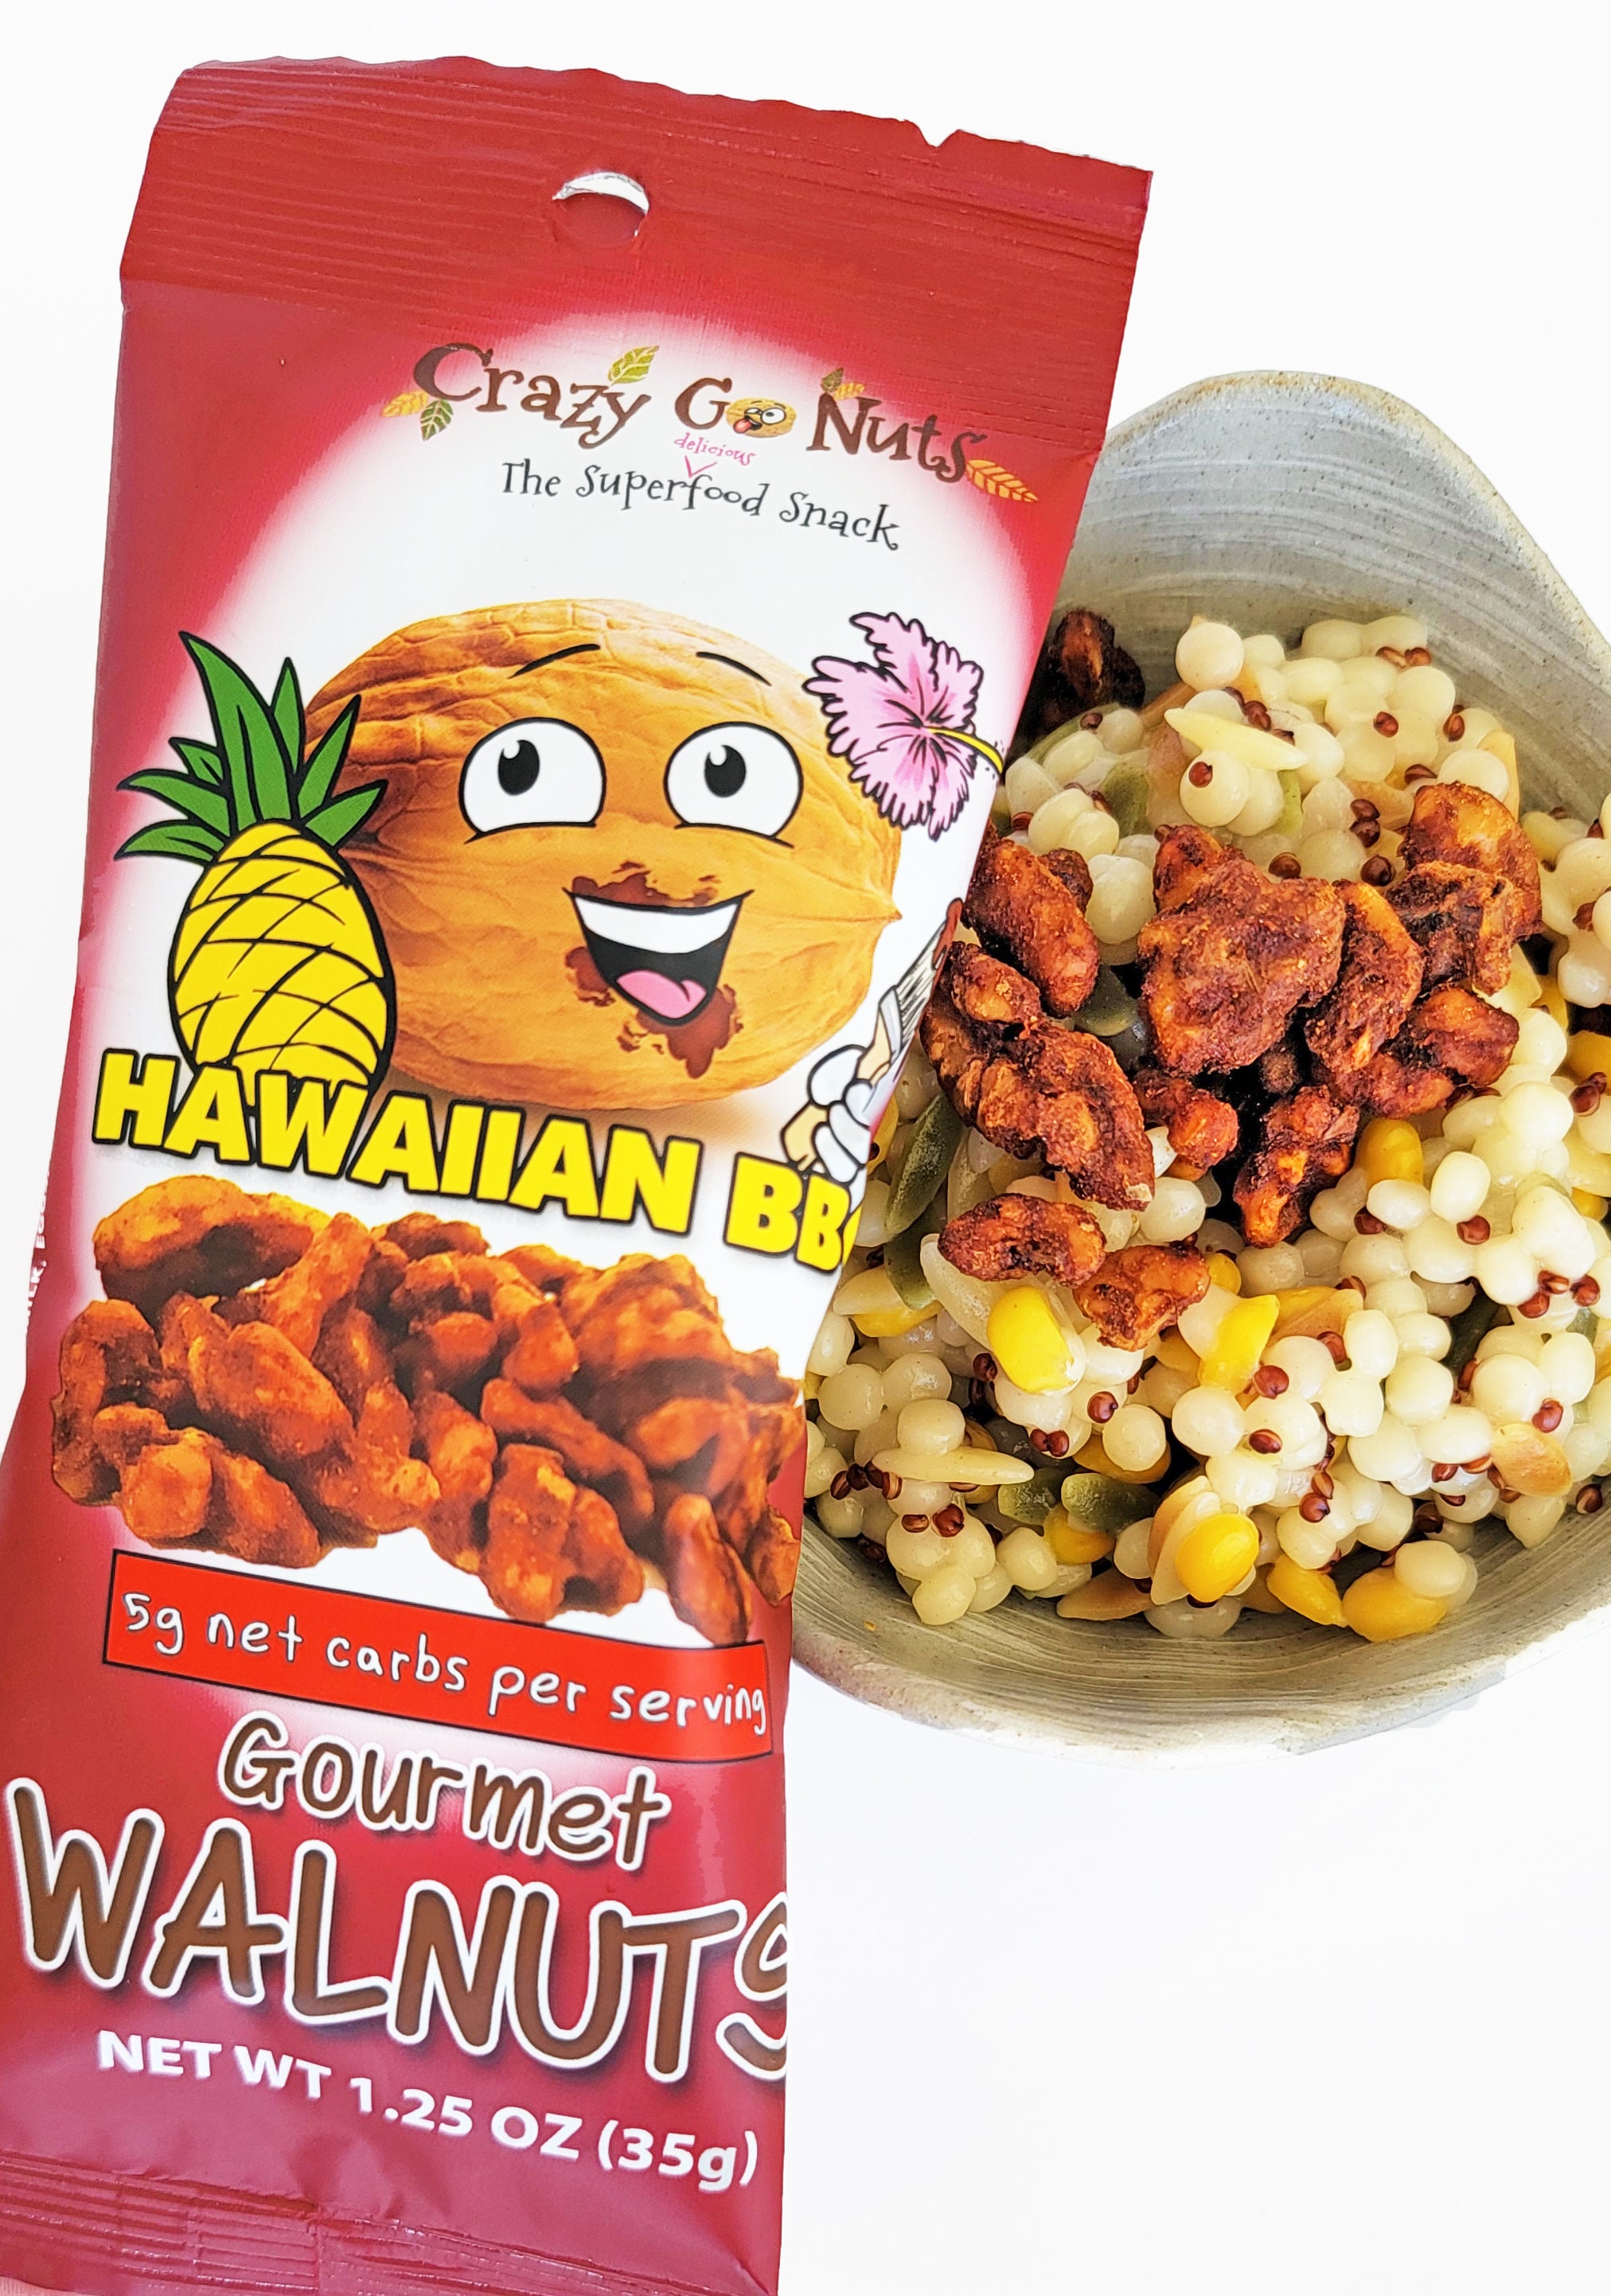 Hawaiian BBQ walnuts being used as a topping for a grain bowl